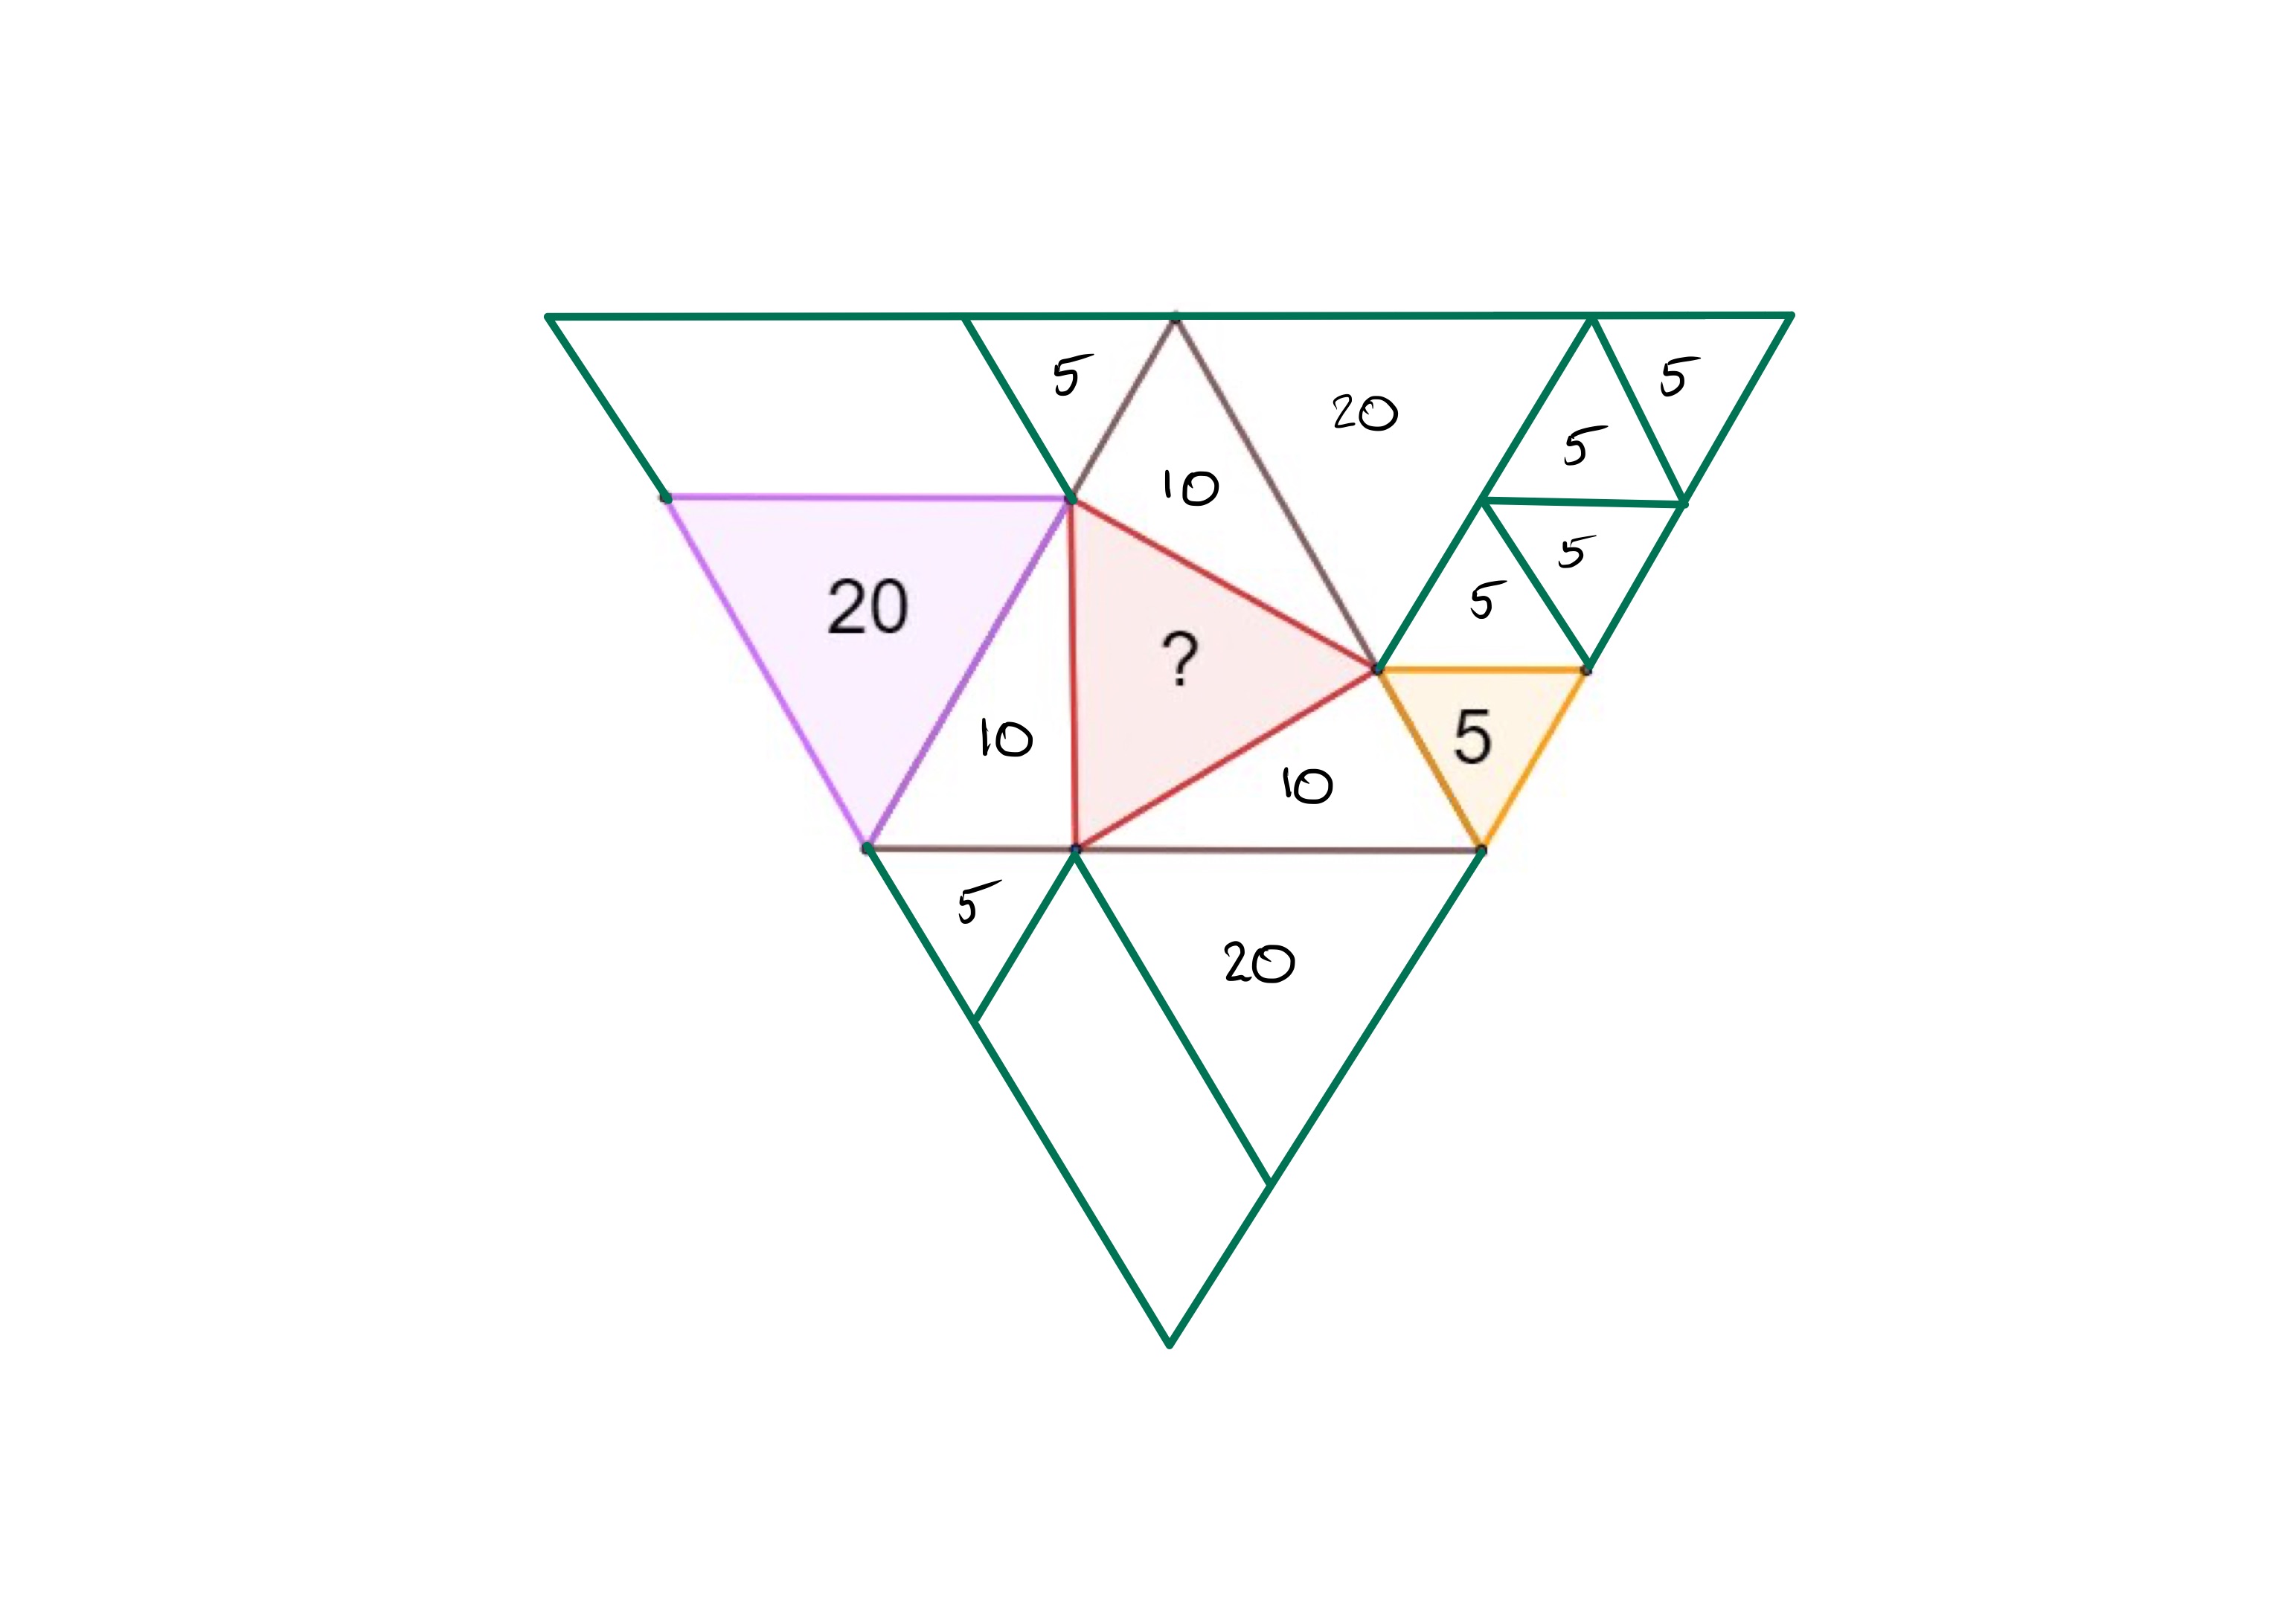 Four equilateral triangles dissected